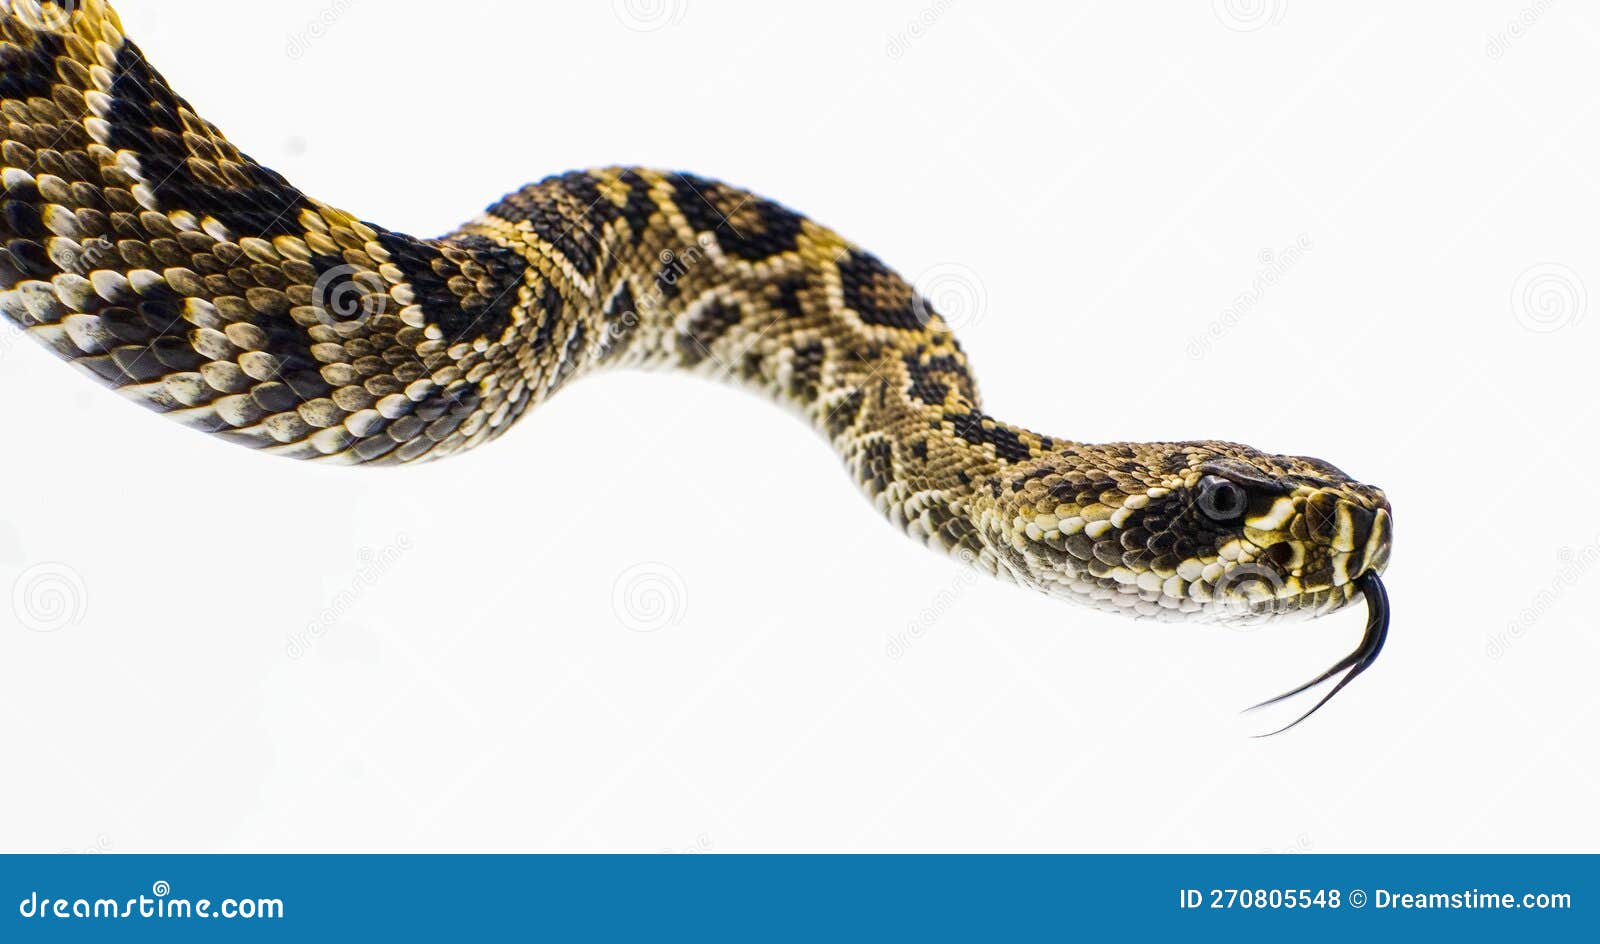 eastern diamondback rattlesnake - crotalus adamanteus  on white background side profile view of head with tongue out